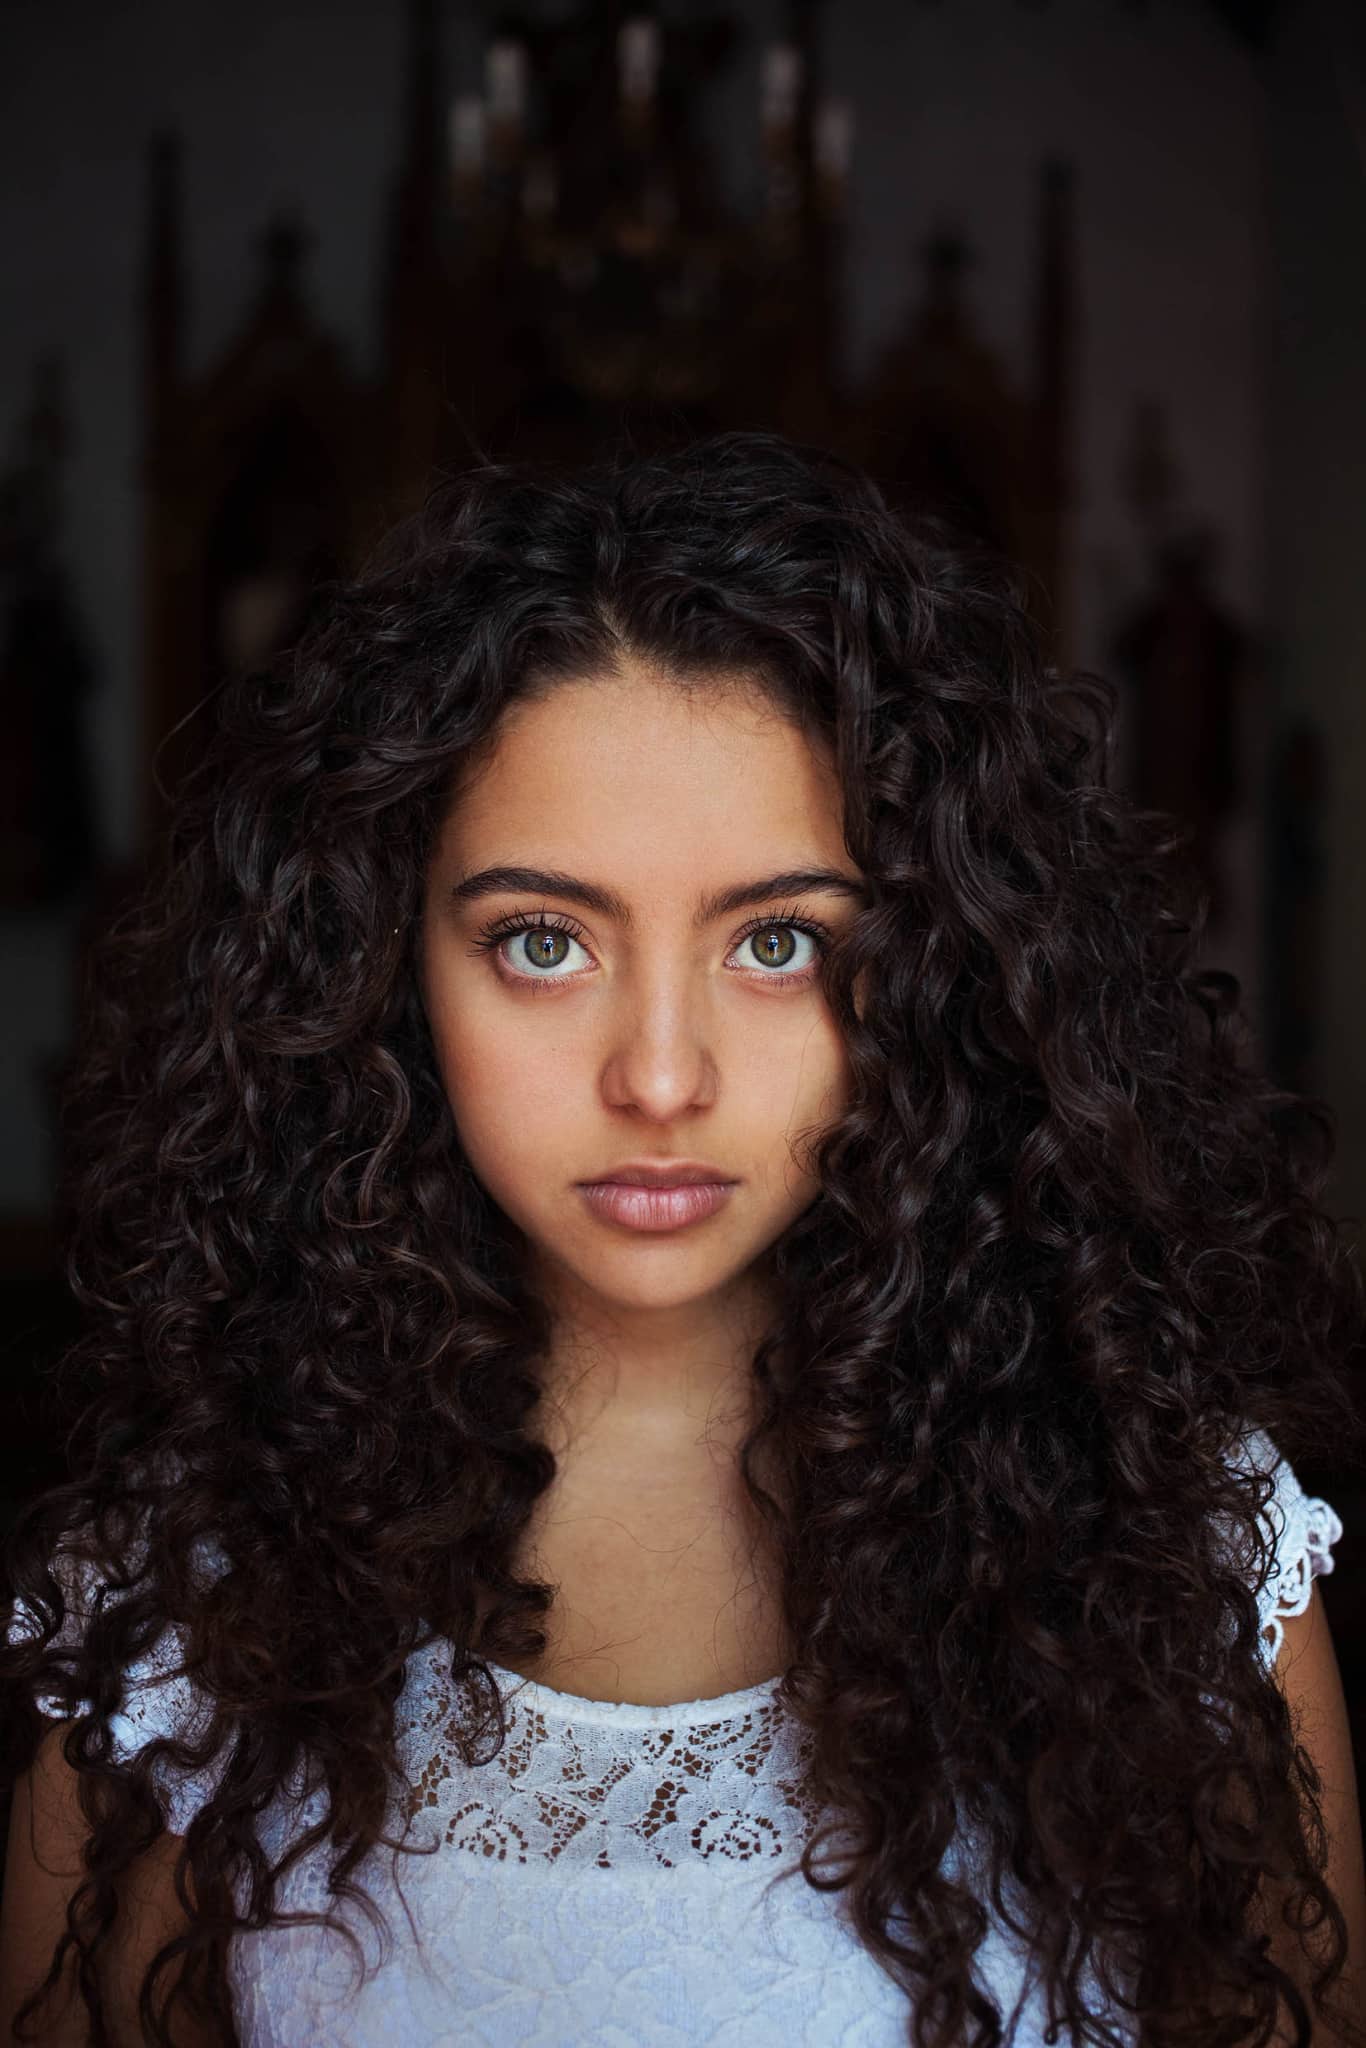 Mihaela Noroc: 10 Things Her Portrait Photography Can Teach You